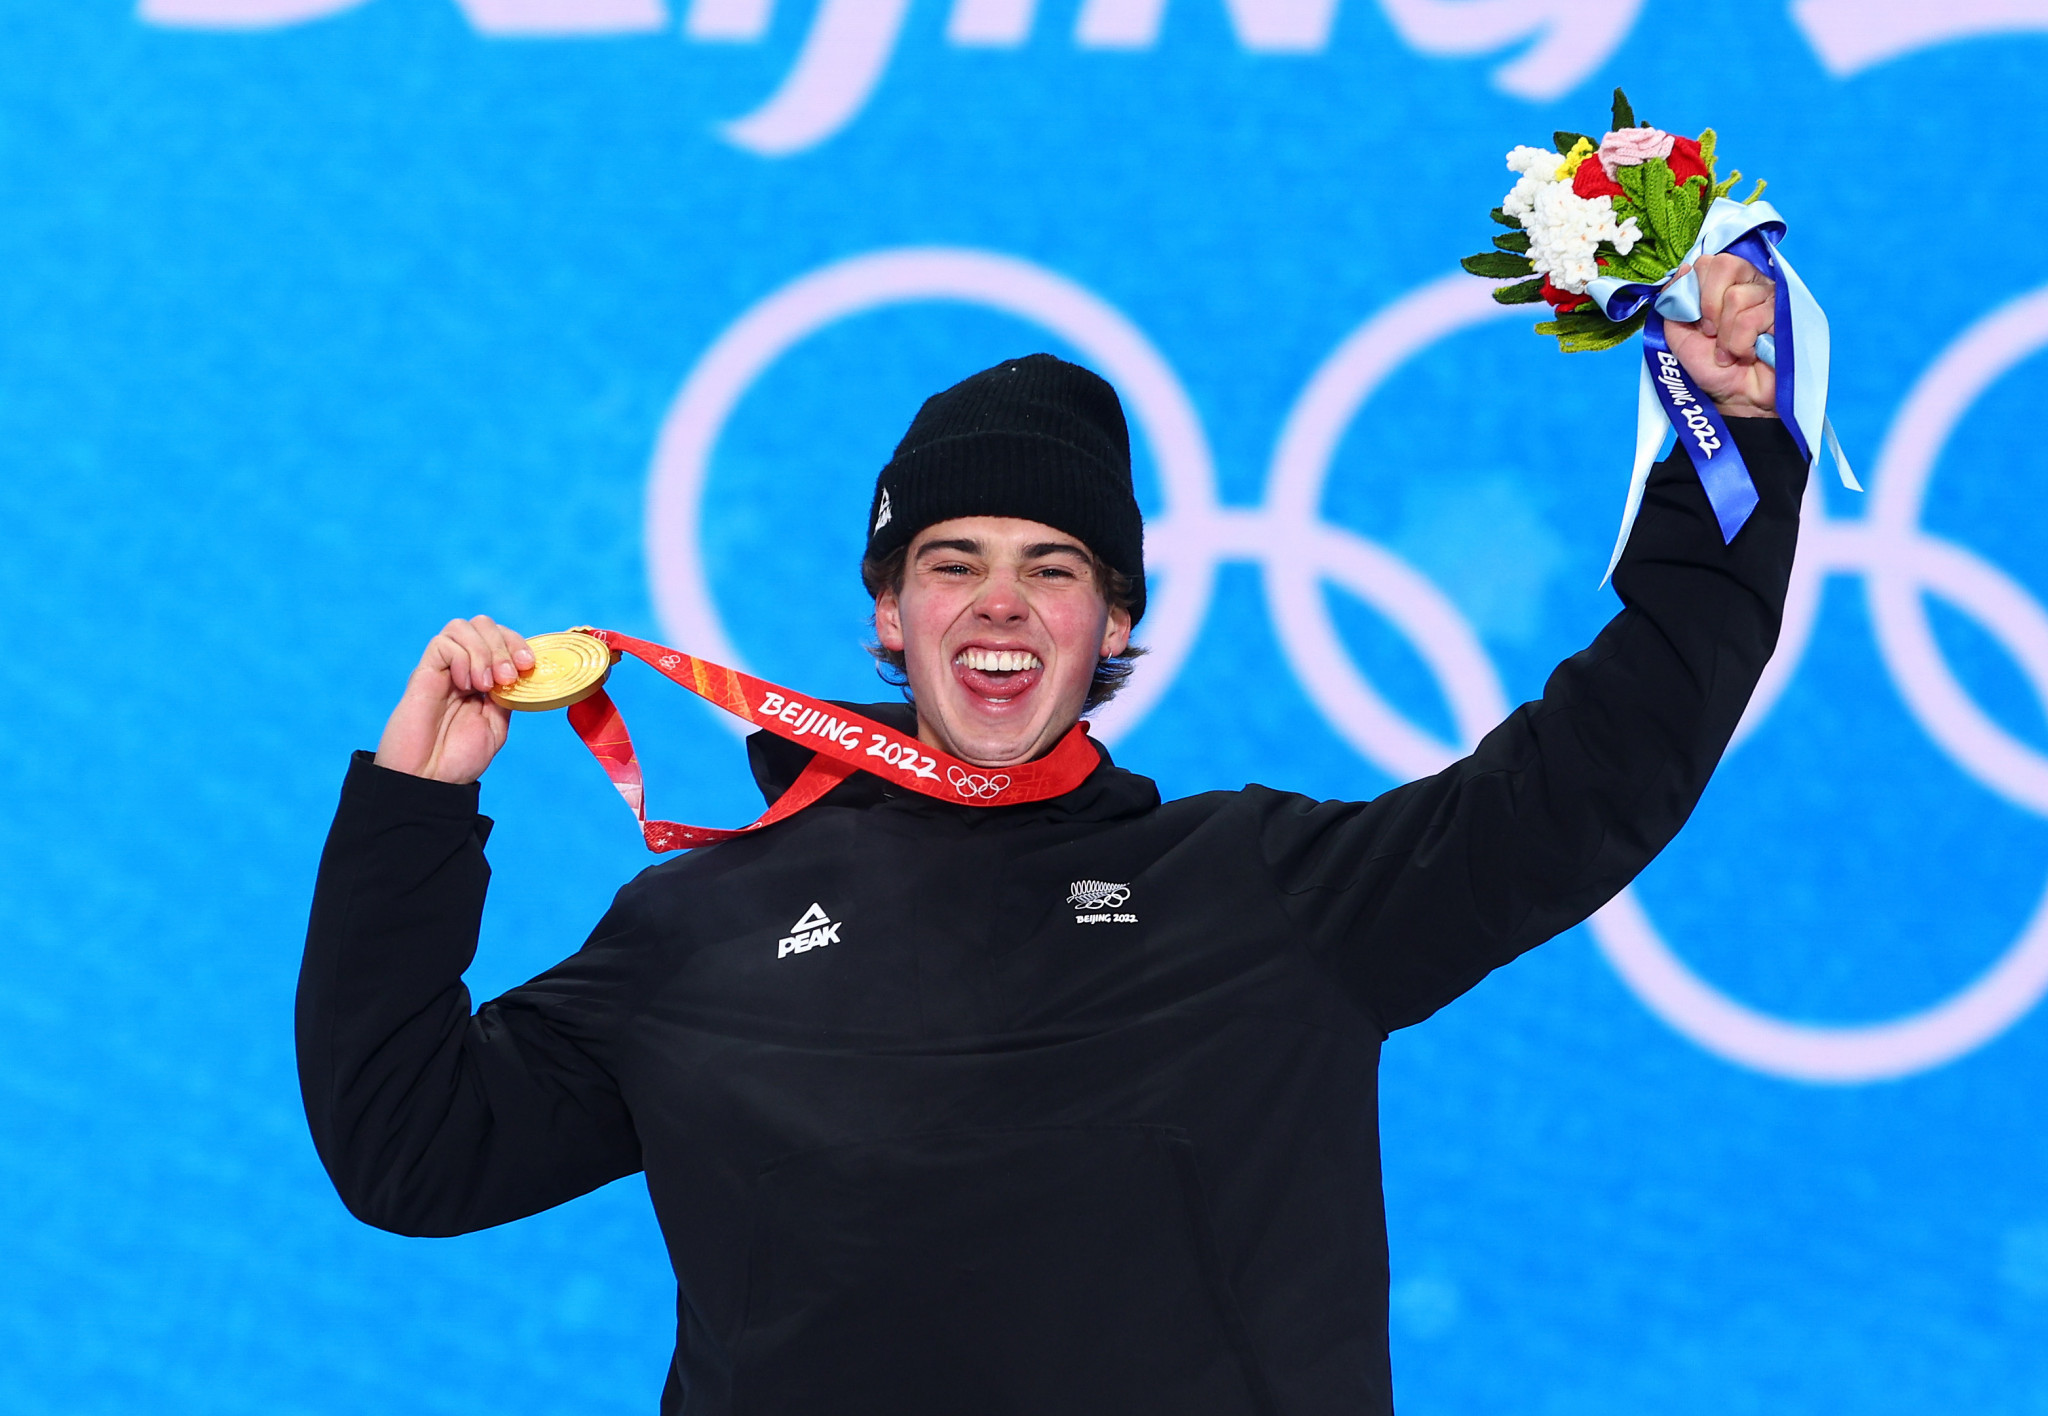 Ski halfpipe Olympic gold medallist Nico Porteous will carry New Zealand's flag at the Closing Ceremony of Beijing 2022 tonight ©Getty Images